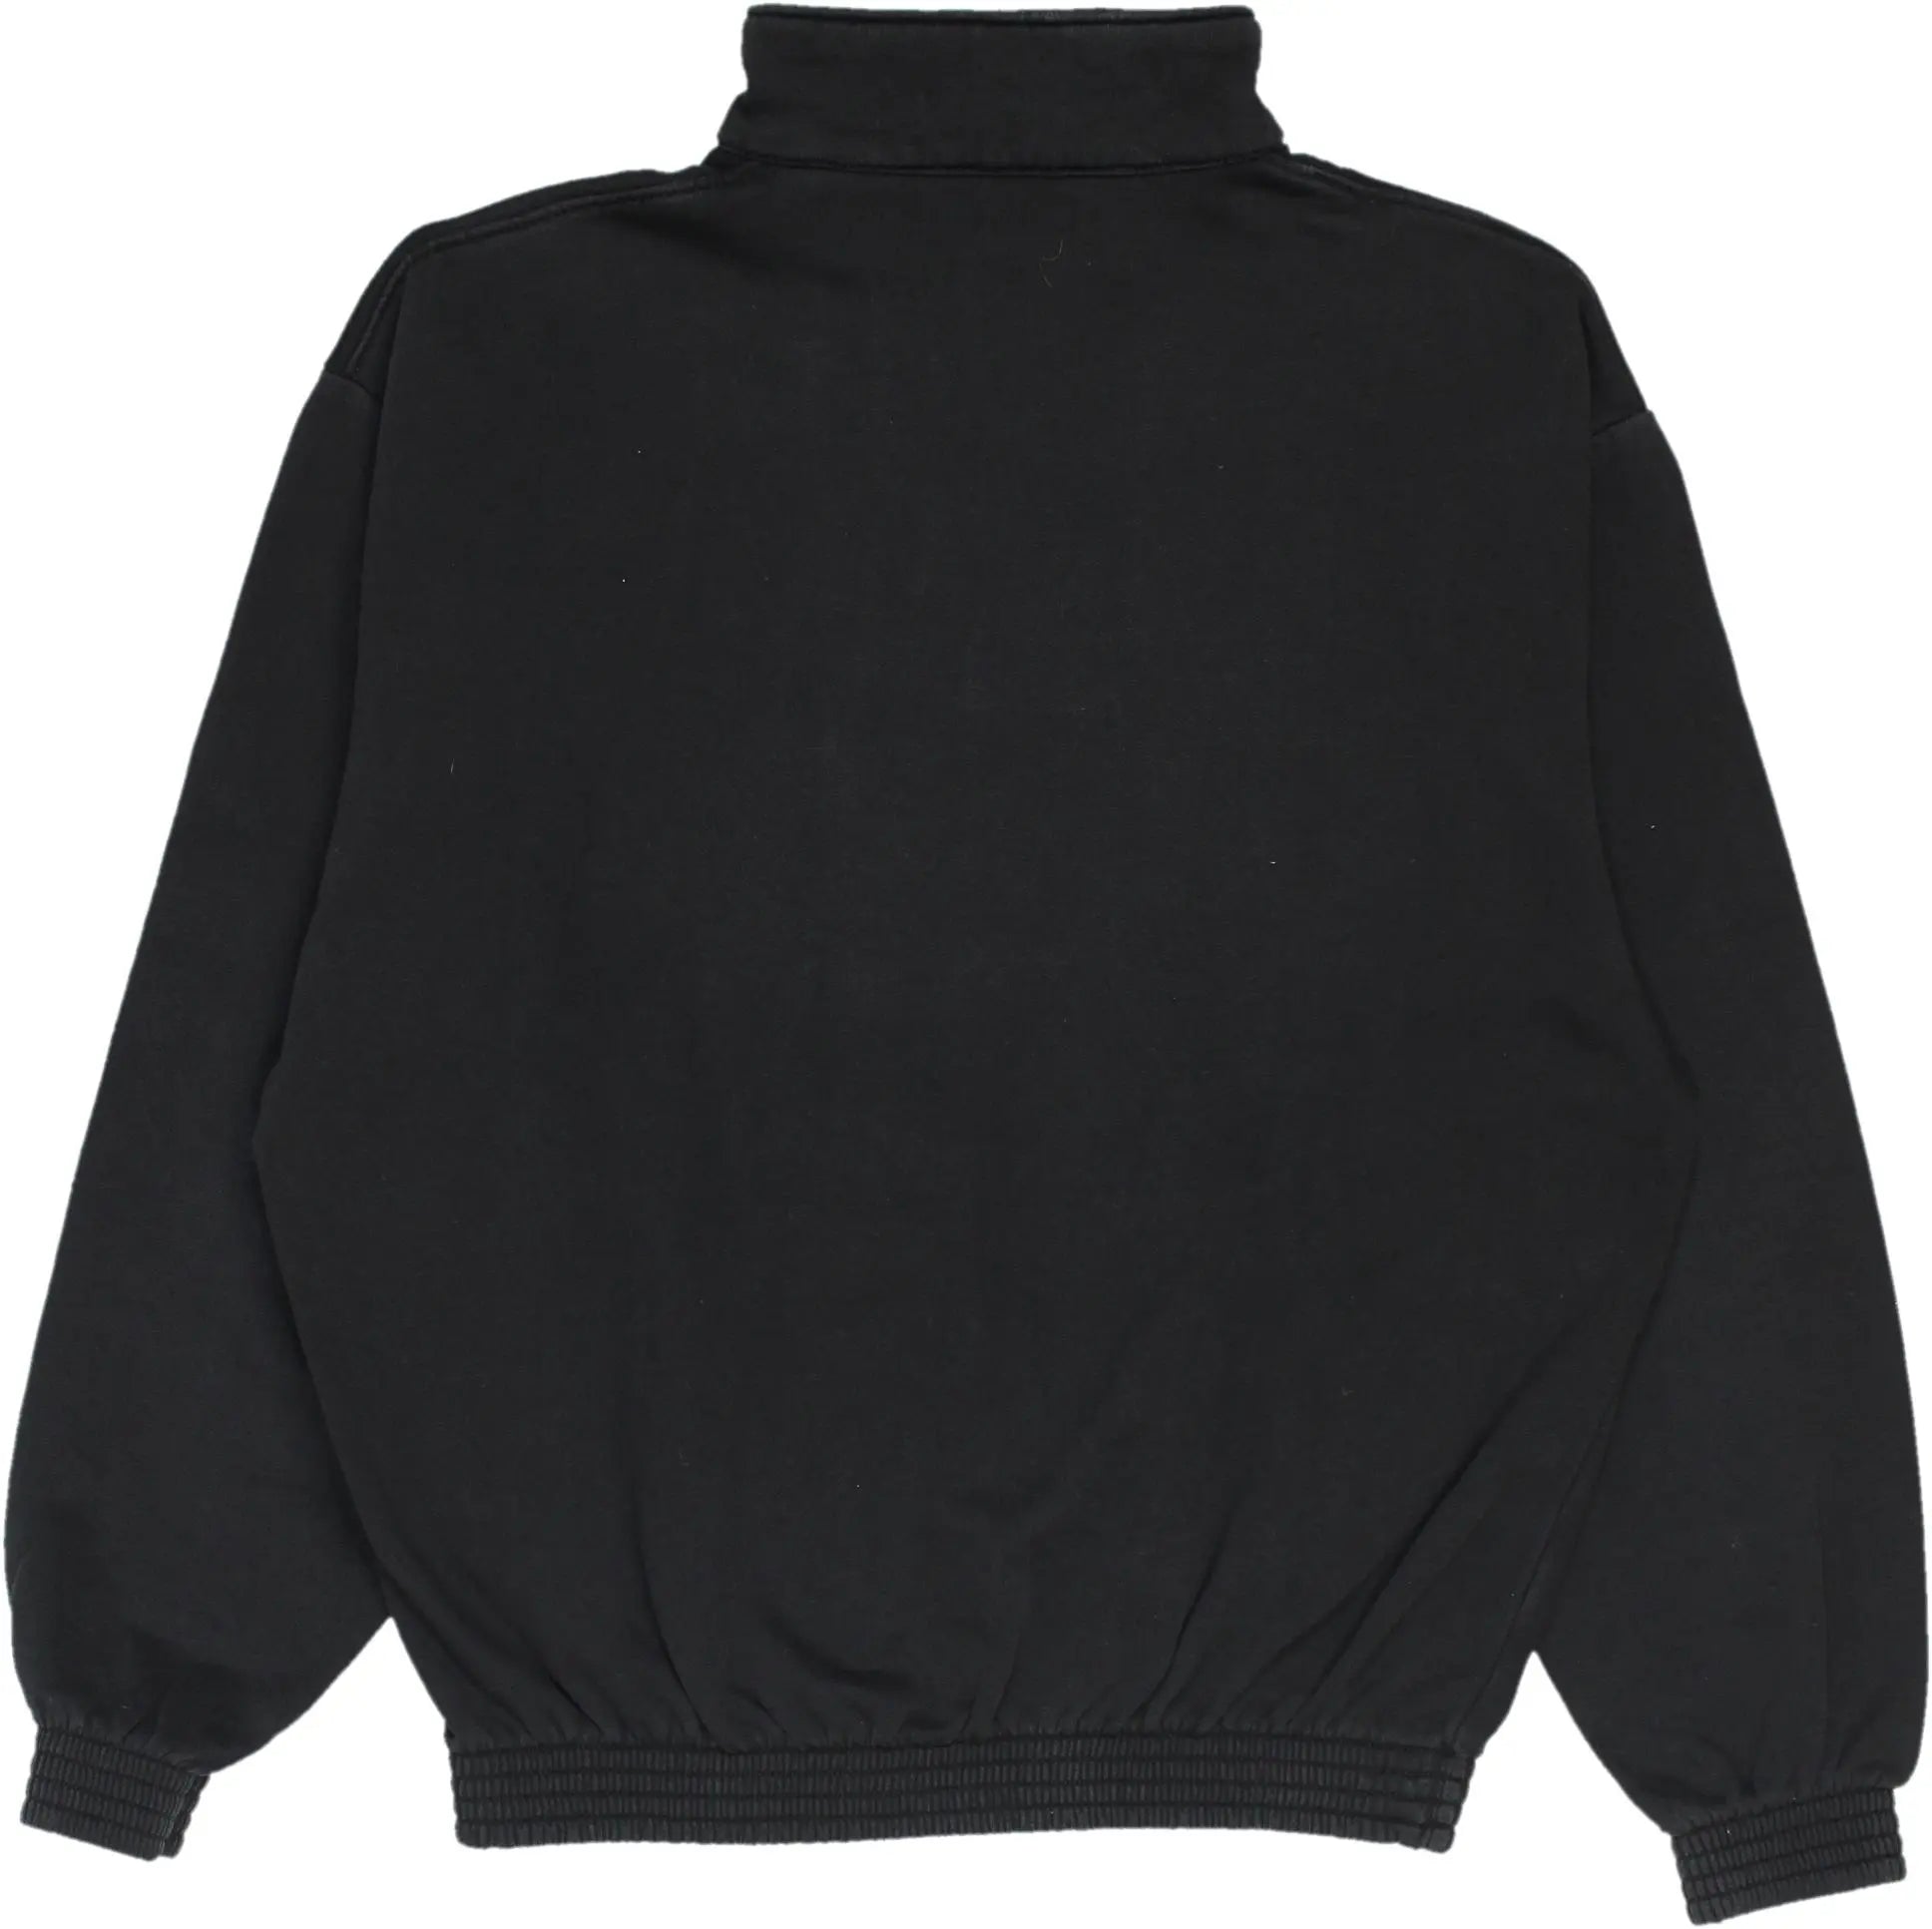 Australian by L'Alpina - Black Quarter Neck Zip Sweater- ThriftTale.com - Vintage and second handclothing